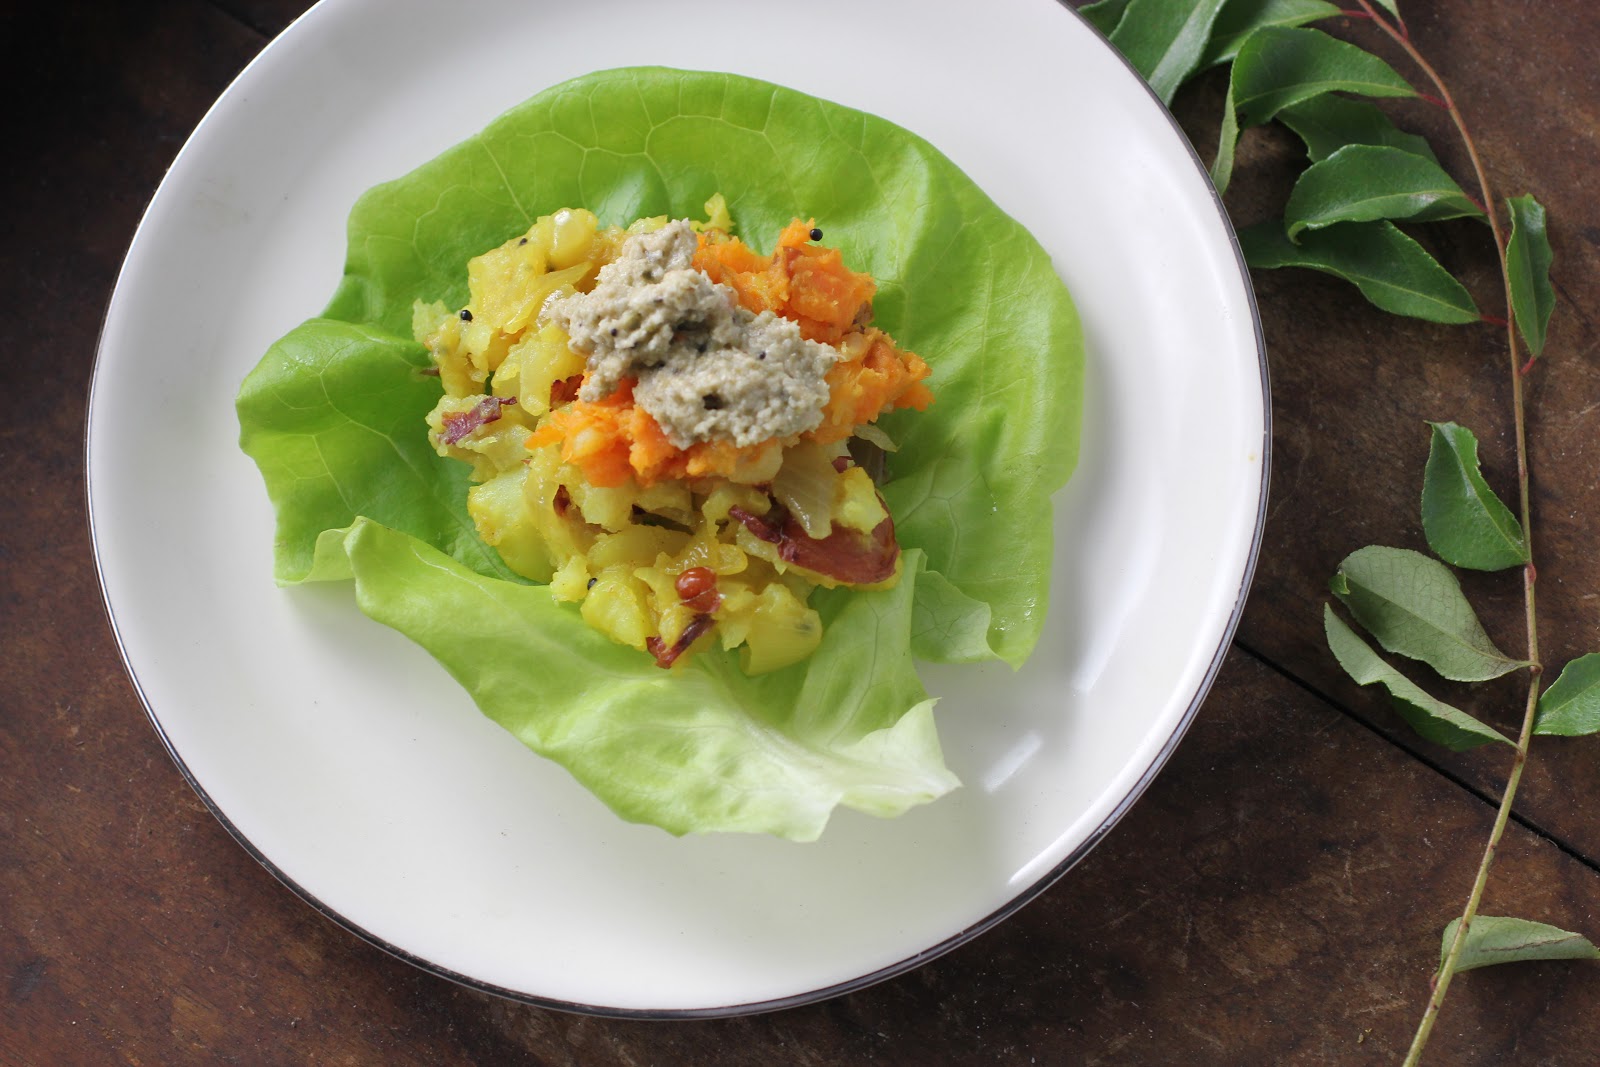 butter lettuce filled with South Indian potato curry and coconut chutney